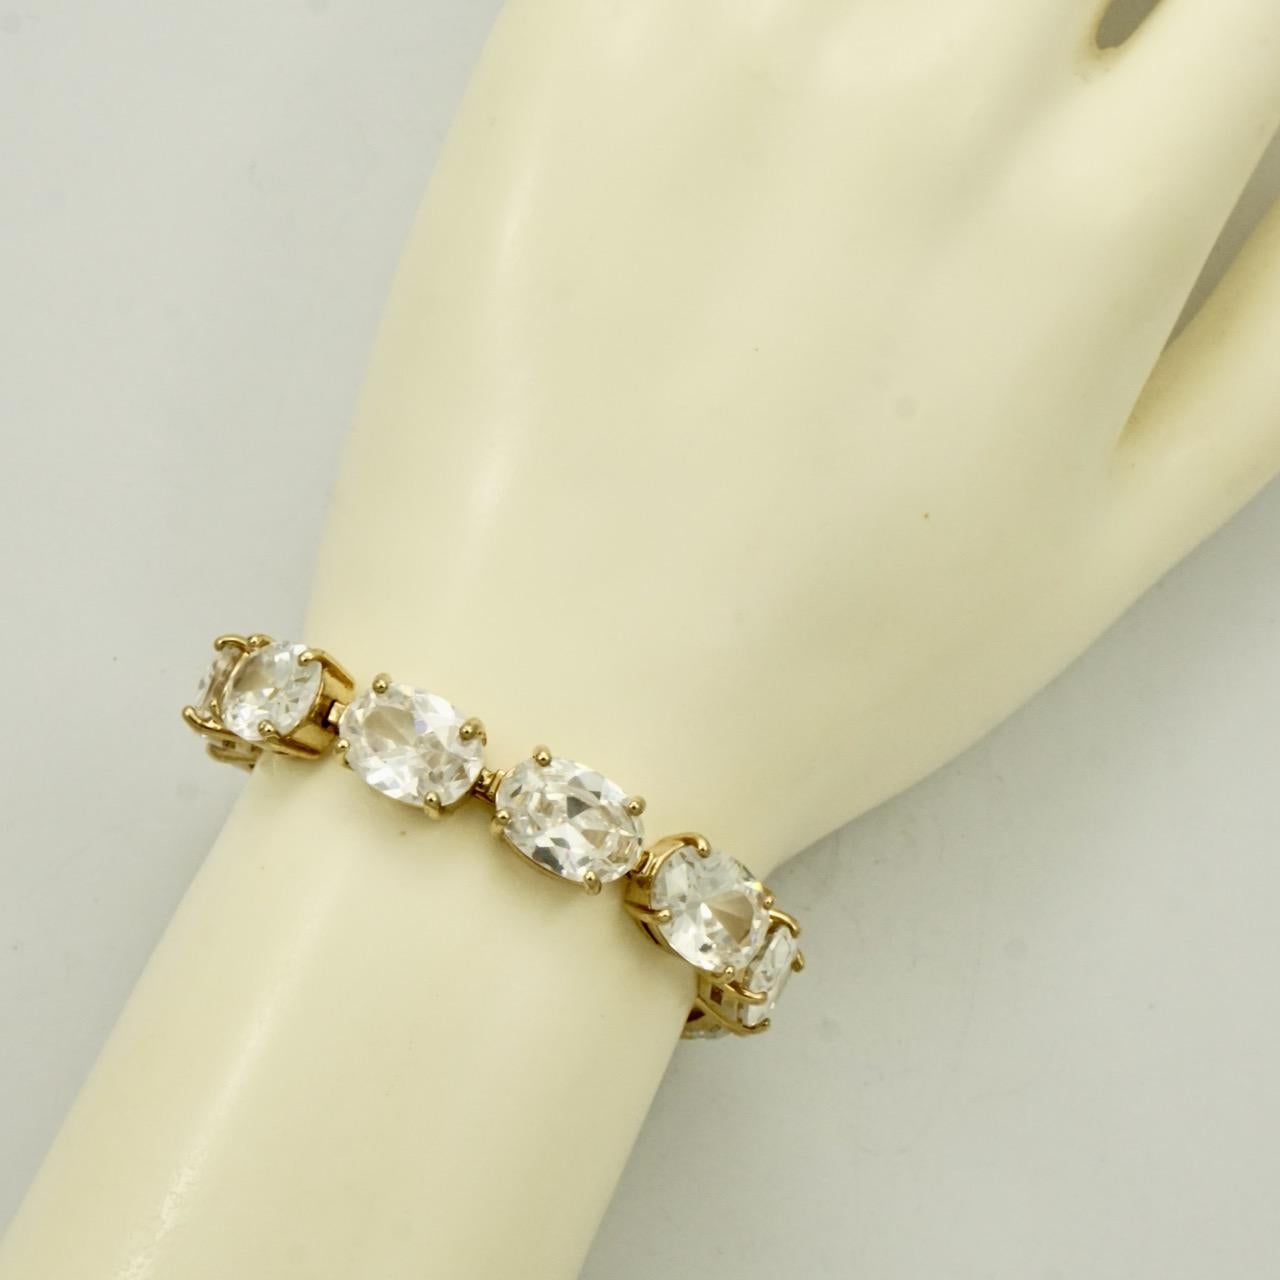 Monet Gold Plated and Large Clear Oval Rhinestone Link Bracelet For Sale 5